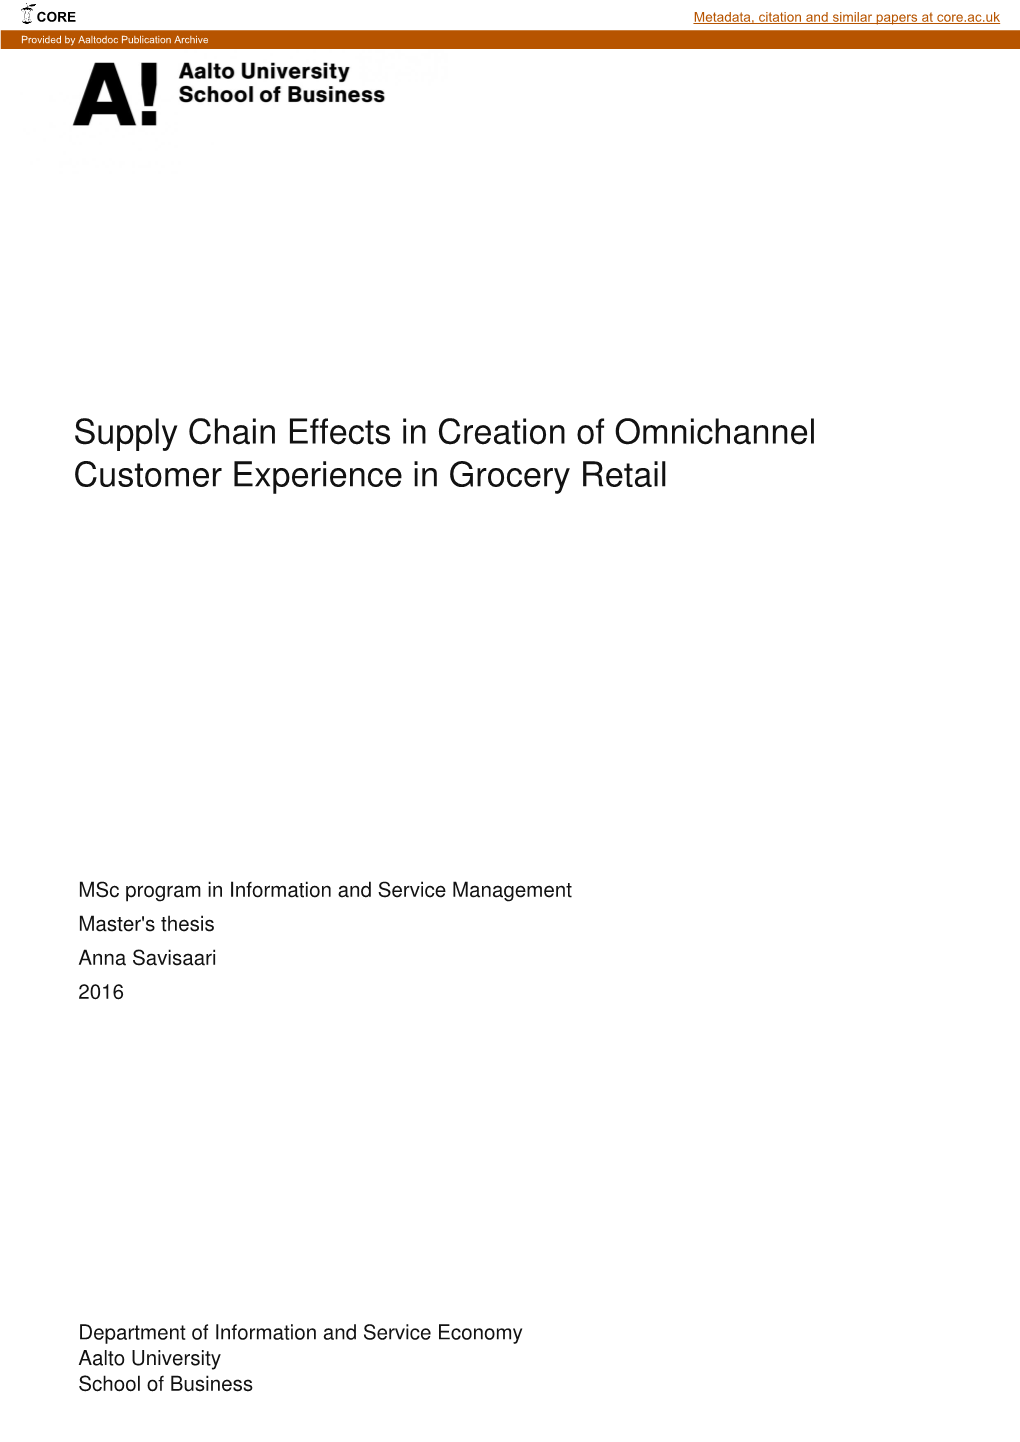 Supply Chain Effects in Creation of Omnichannel Customer Experience in Grocery Retail